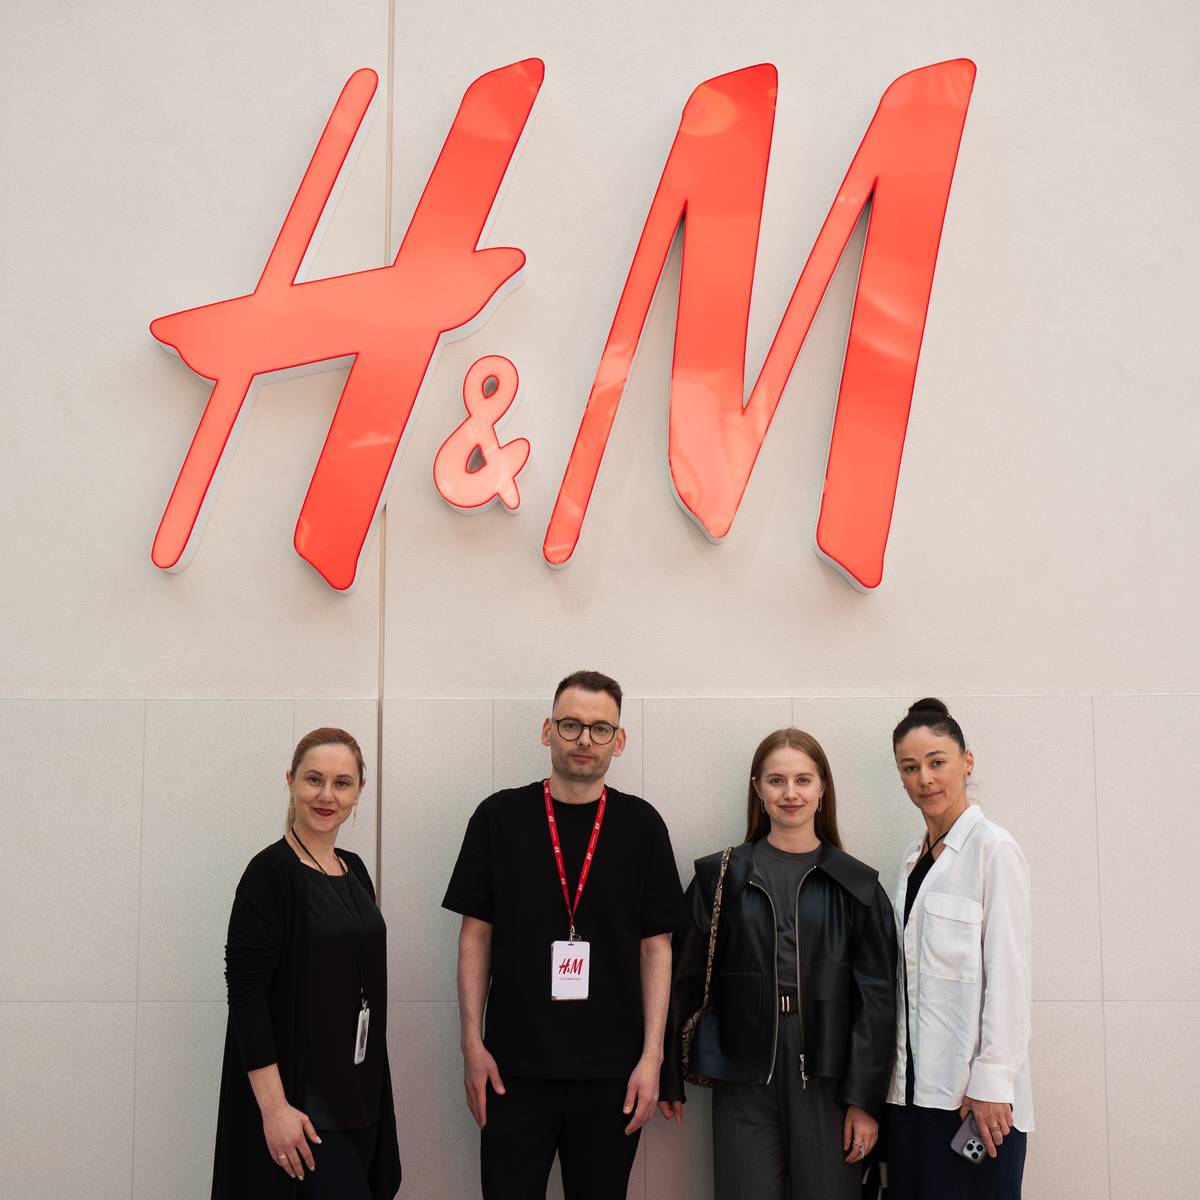 A new two-story H&M opened in Blockbuster Mall